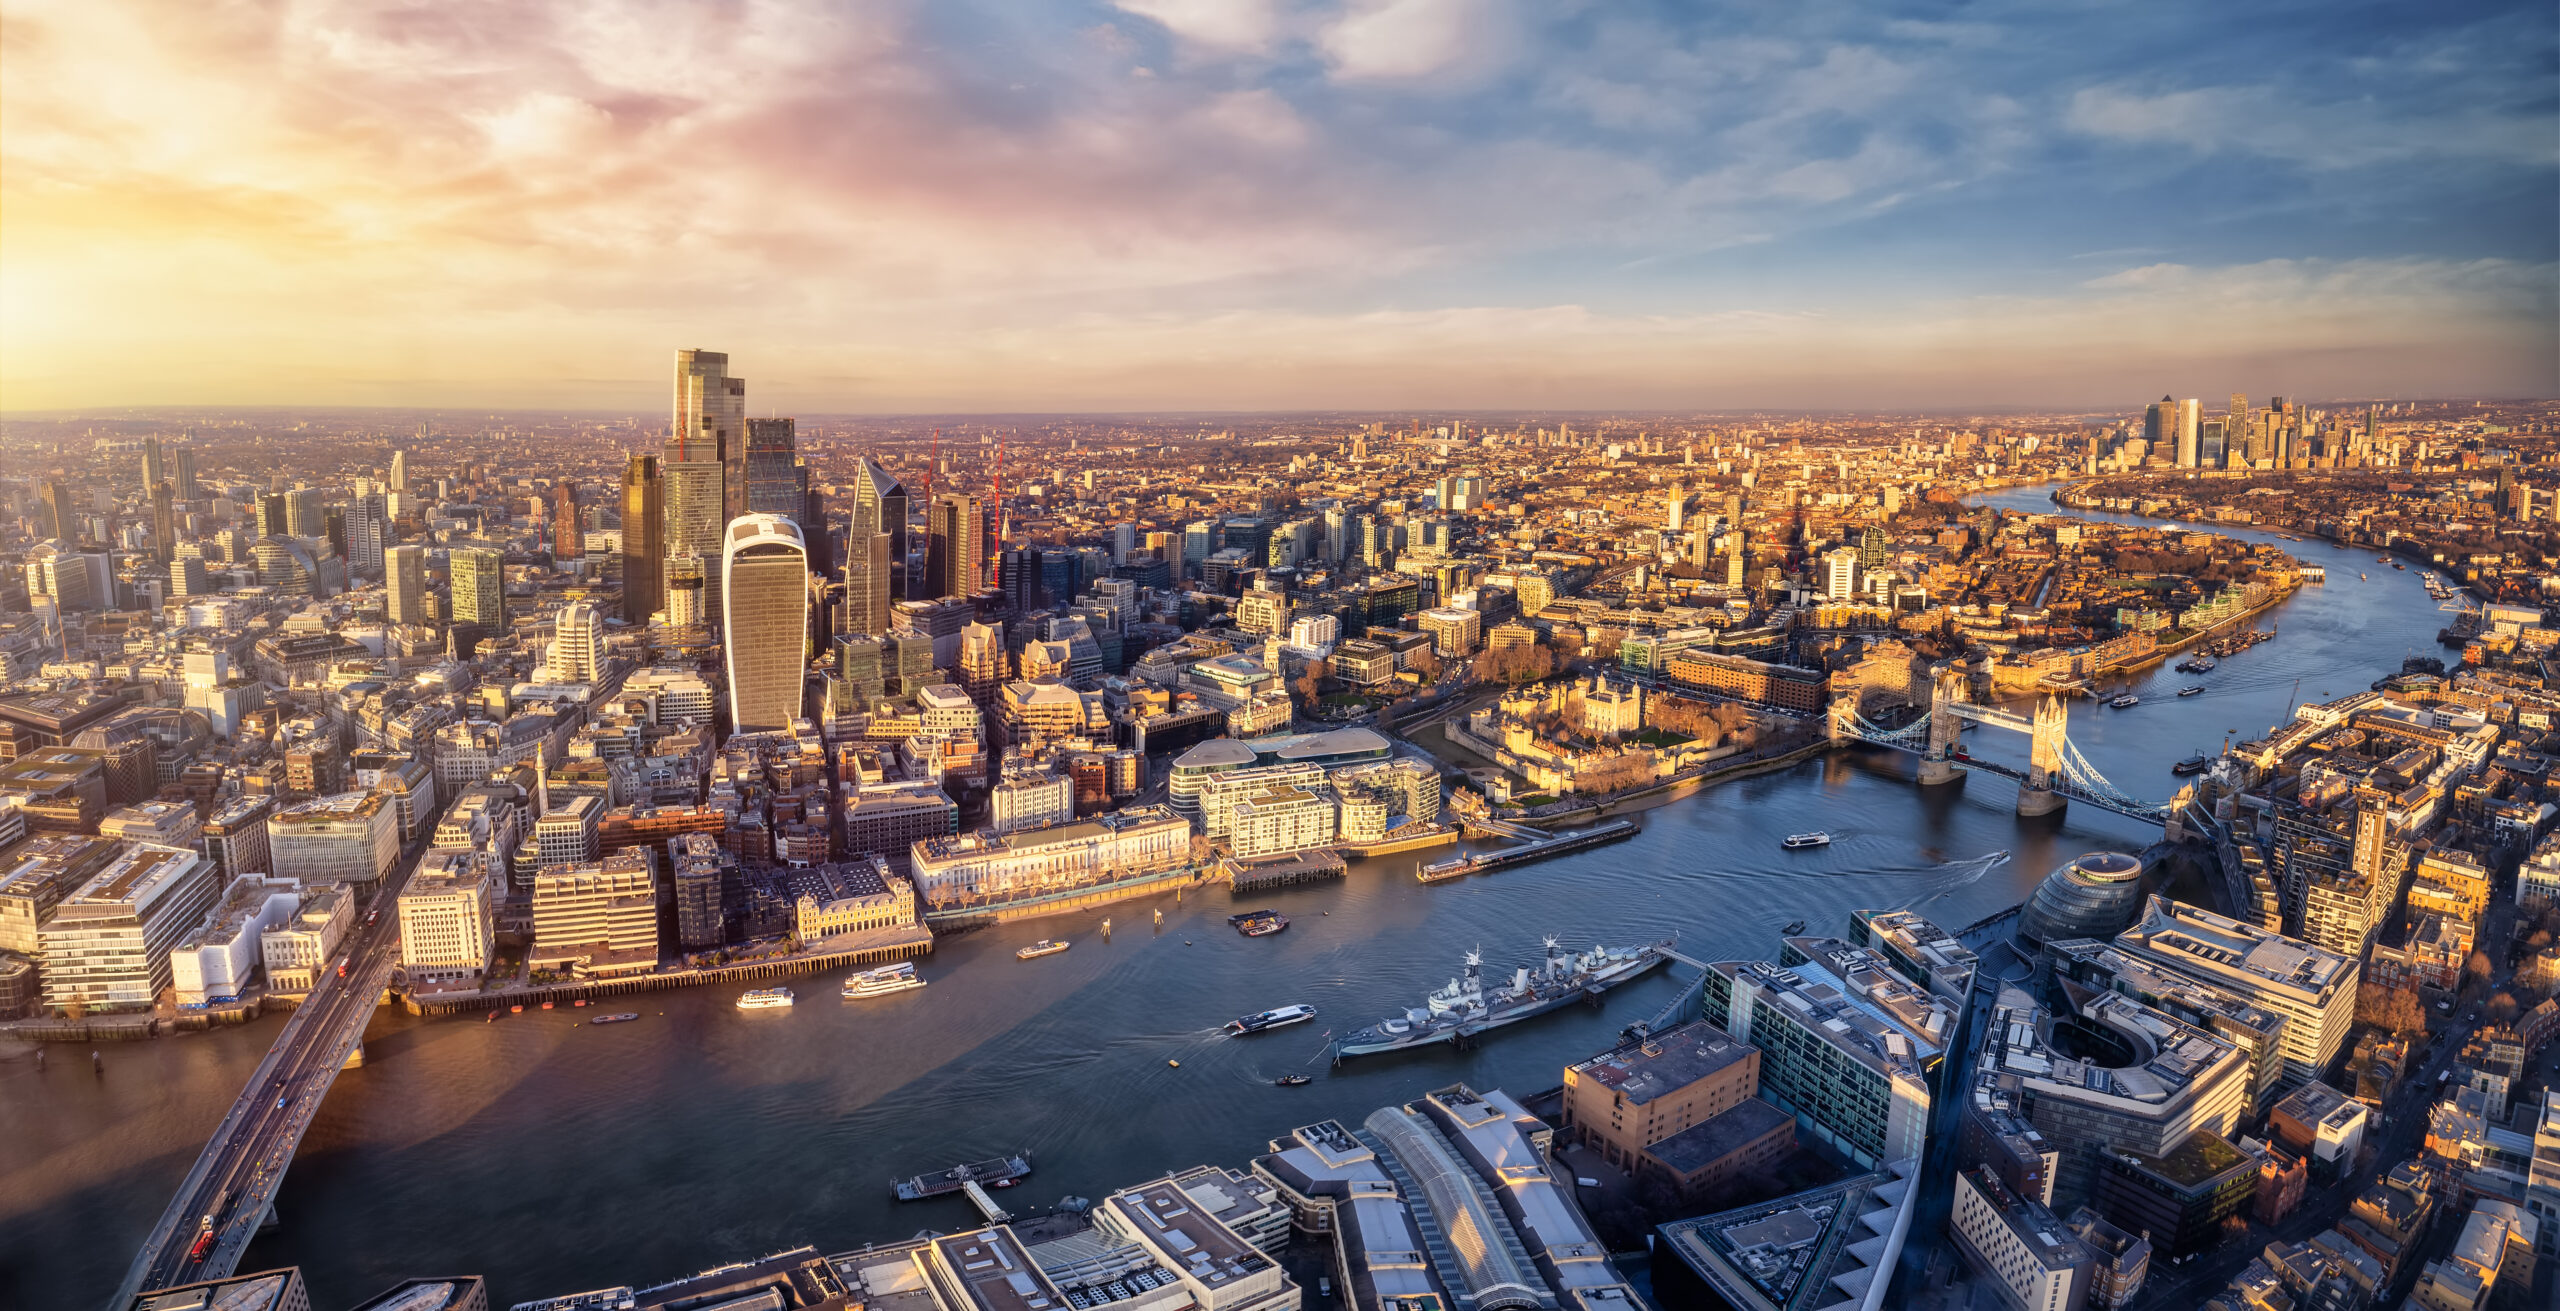 Panoramic sunset view over the skyline of the City of London, England, down the River Thames with Tower Bridge and Canary Wharf district